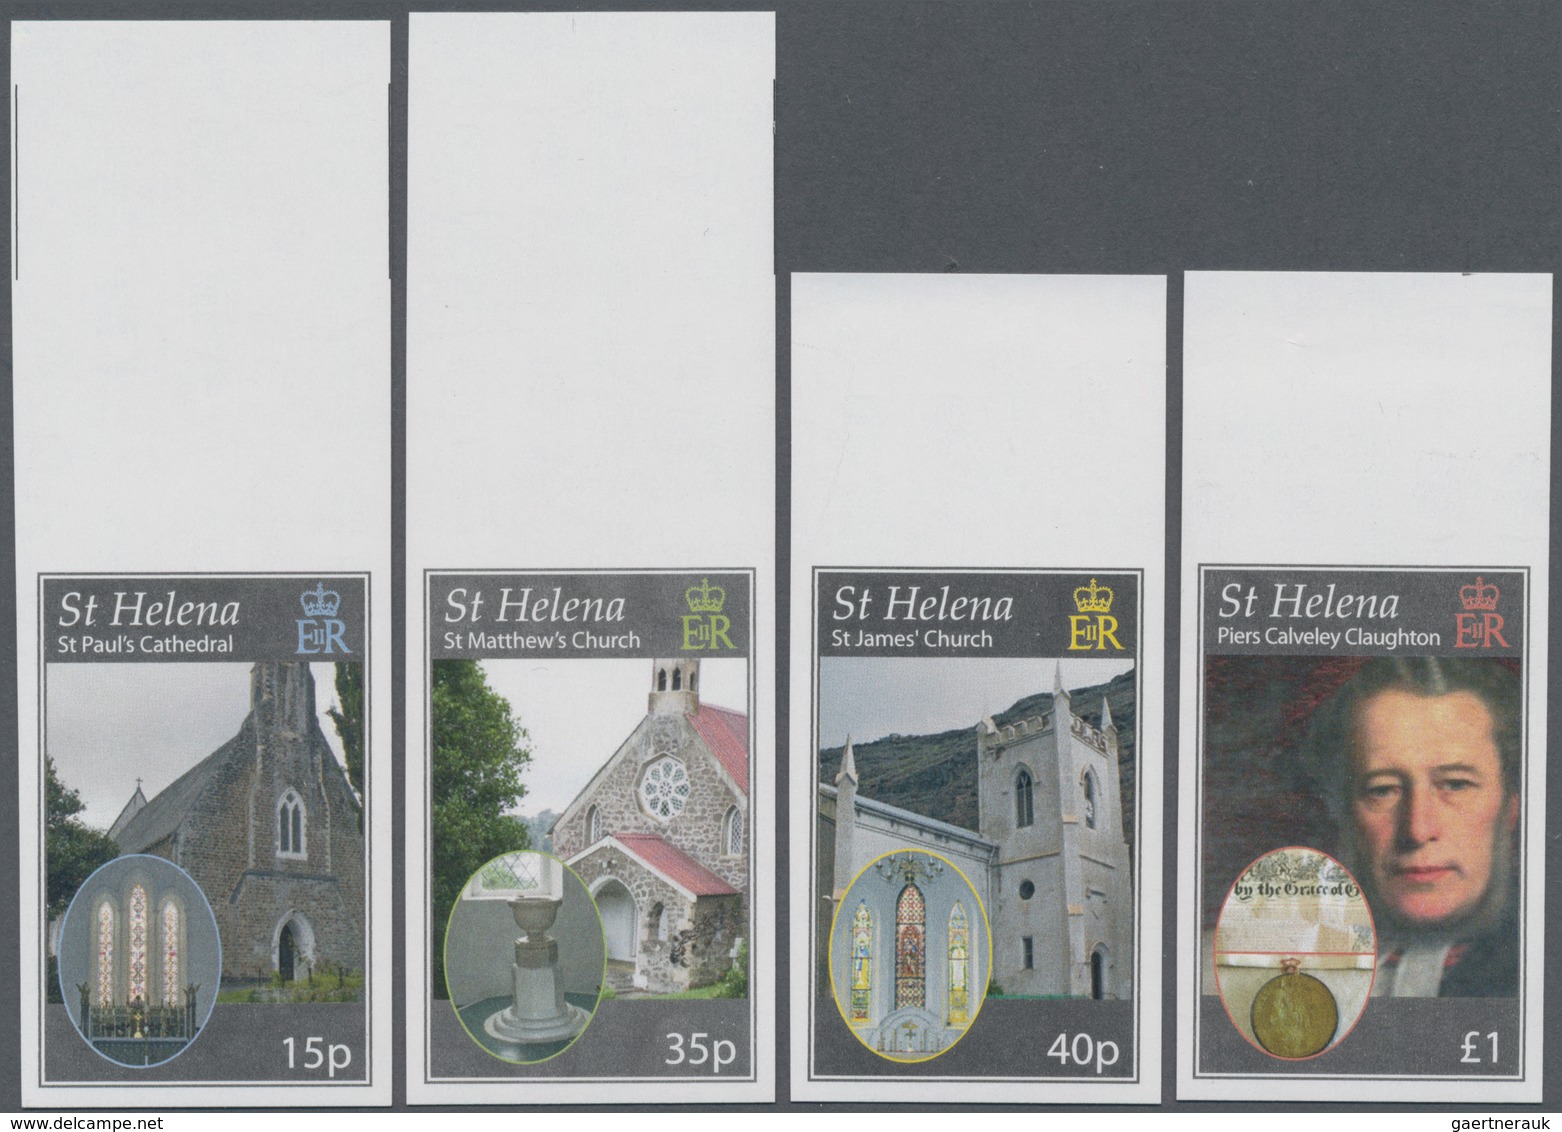 St. Helena: 2009, 150 Years Church Of England At St. Helena Complete IMPERFORATE Set Of Four From Up - Saint Helena Island